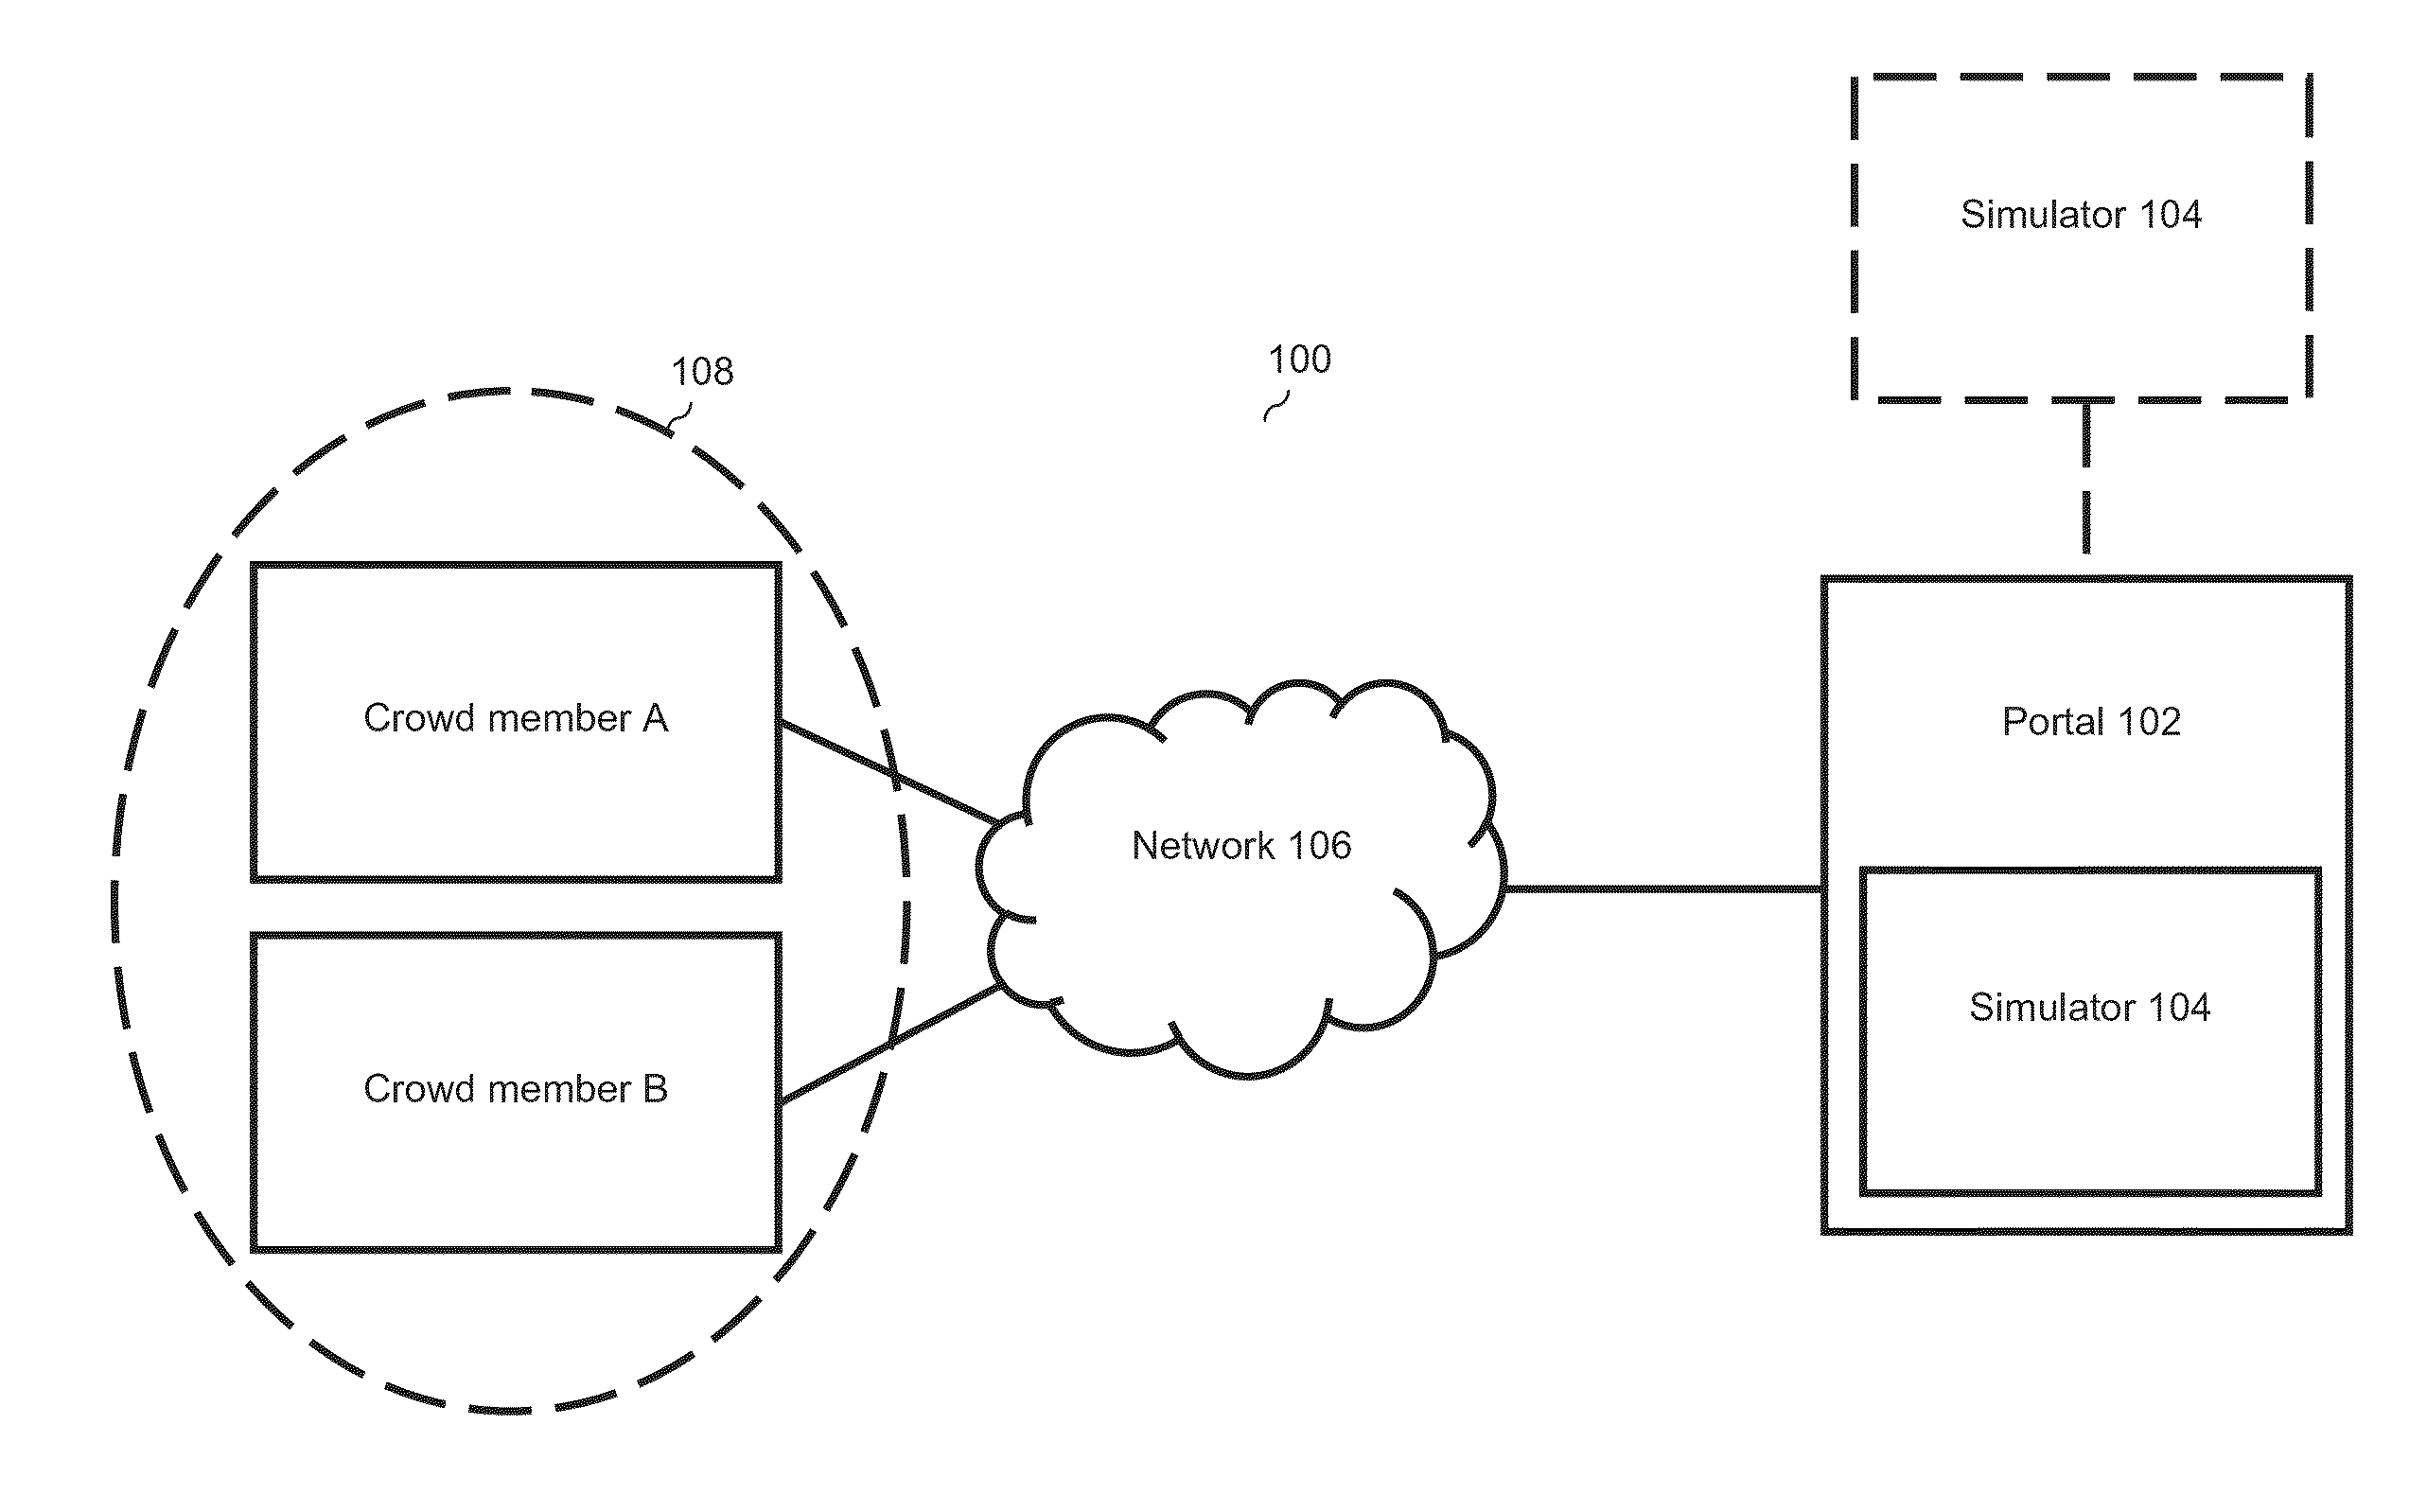 System and method for creating a simulation model via crowdsourcing